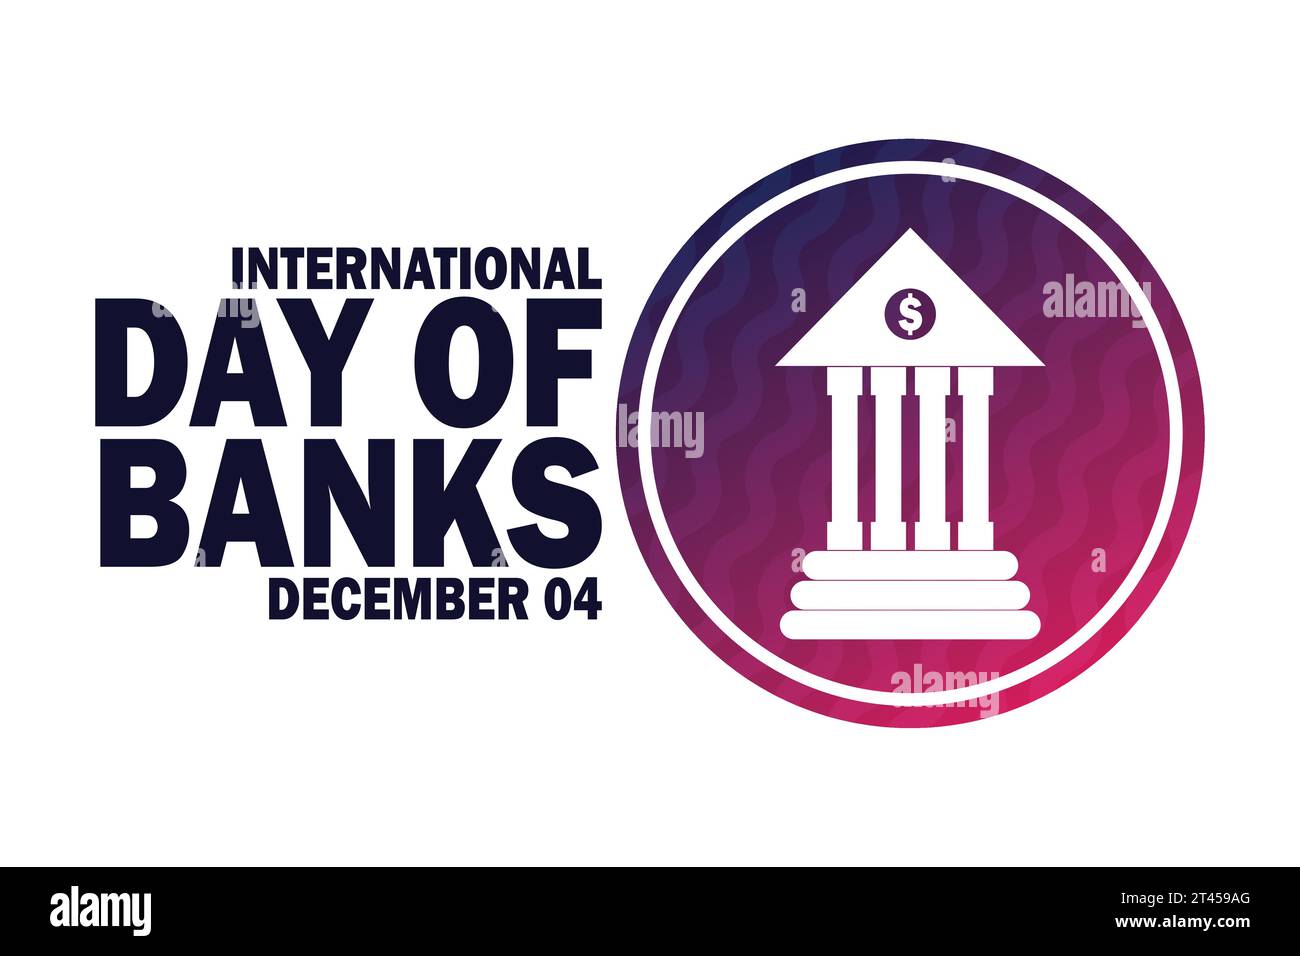 International Day Of Banks. December 04. Holiday concept. Template for background, banner, card, poster with text inscription. Vector illustration. Stock Vector